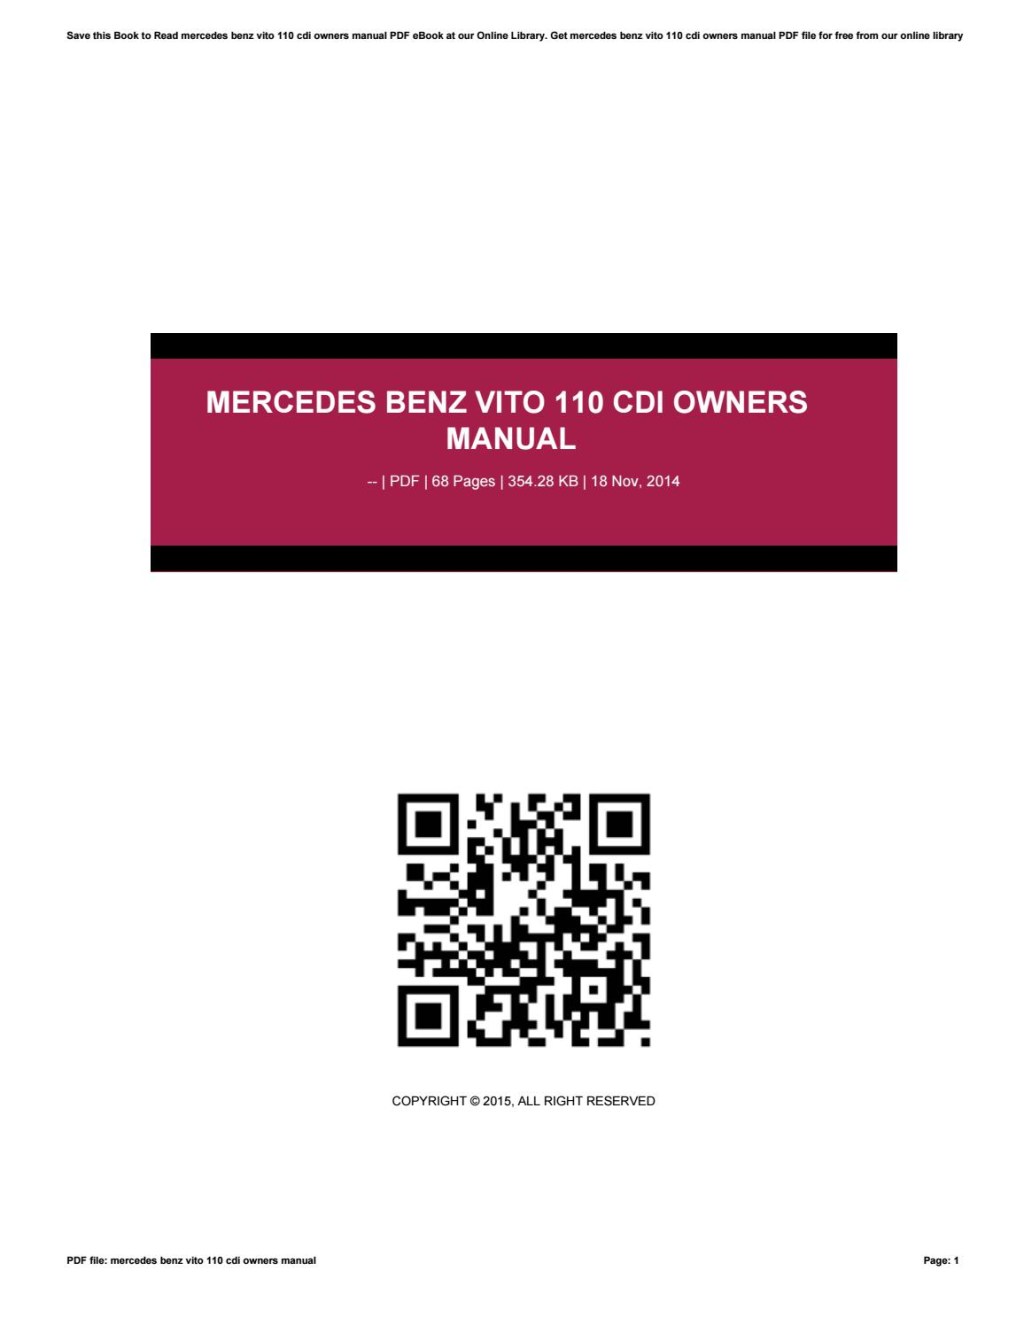 Picture of: Mercedes benz vito  cdi owners manual by JuliusParada – Issuu